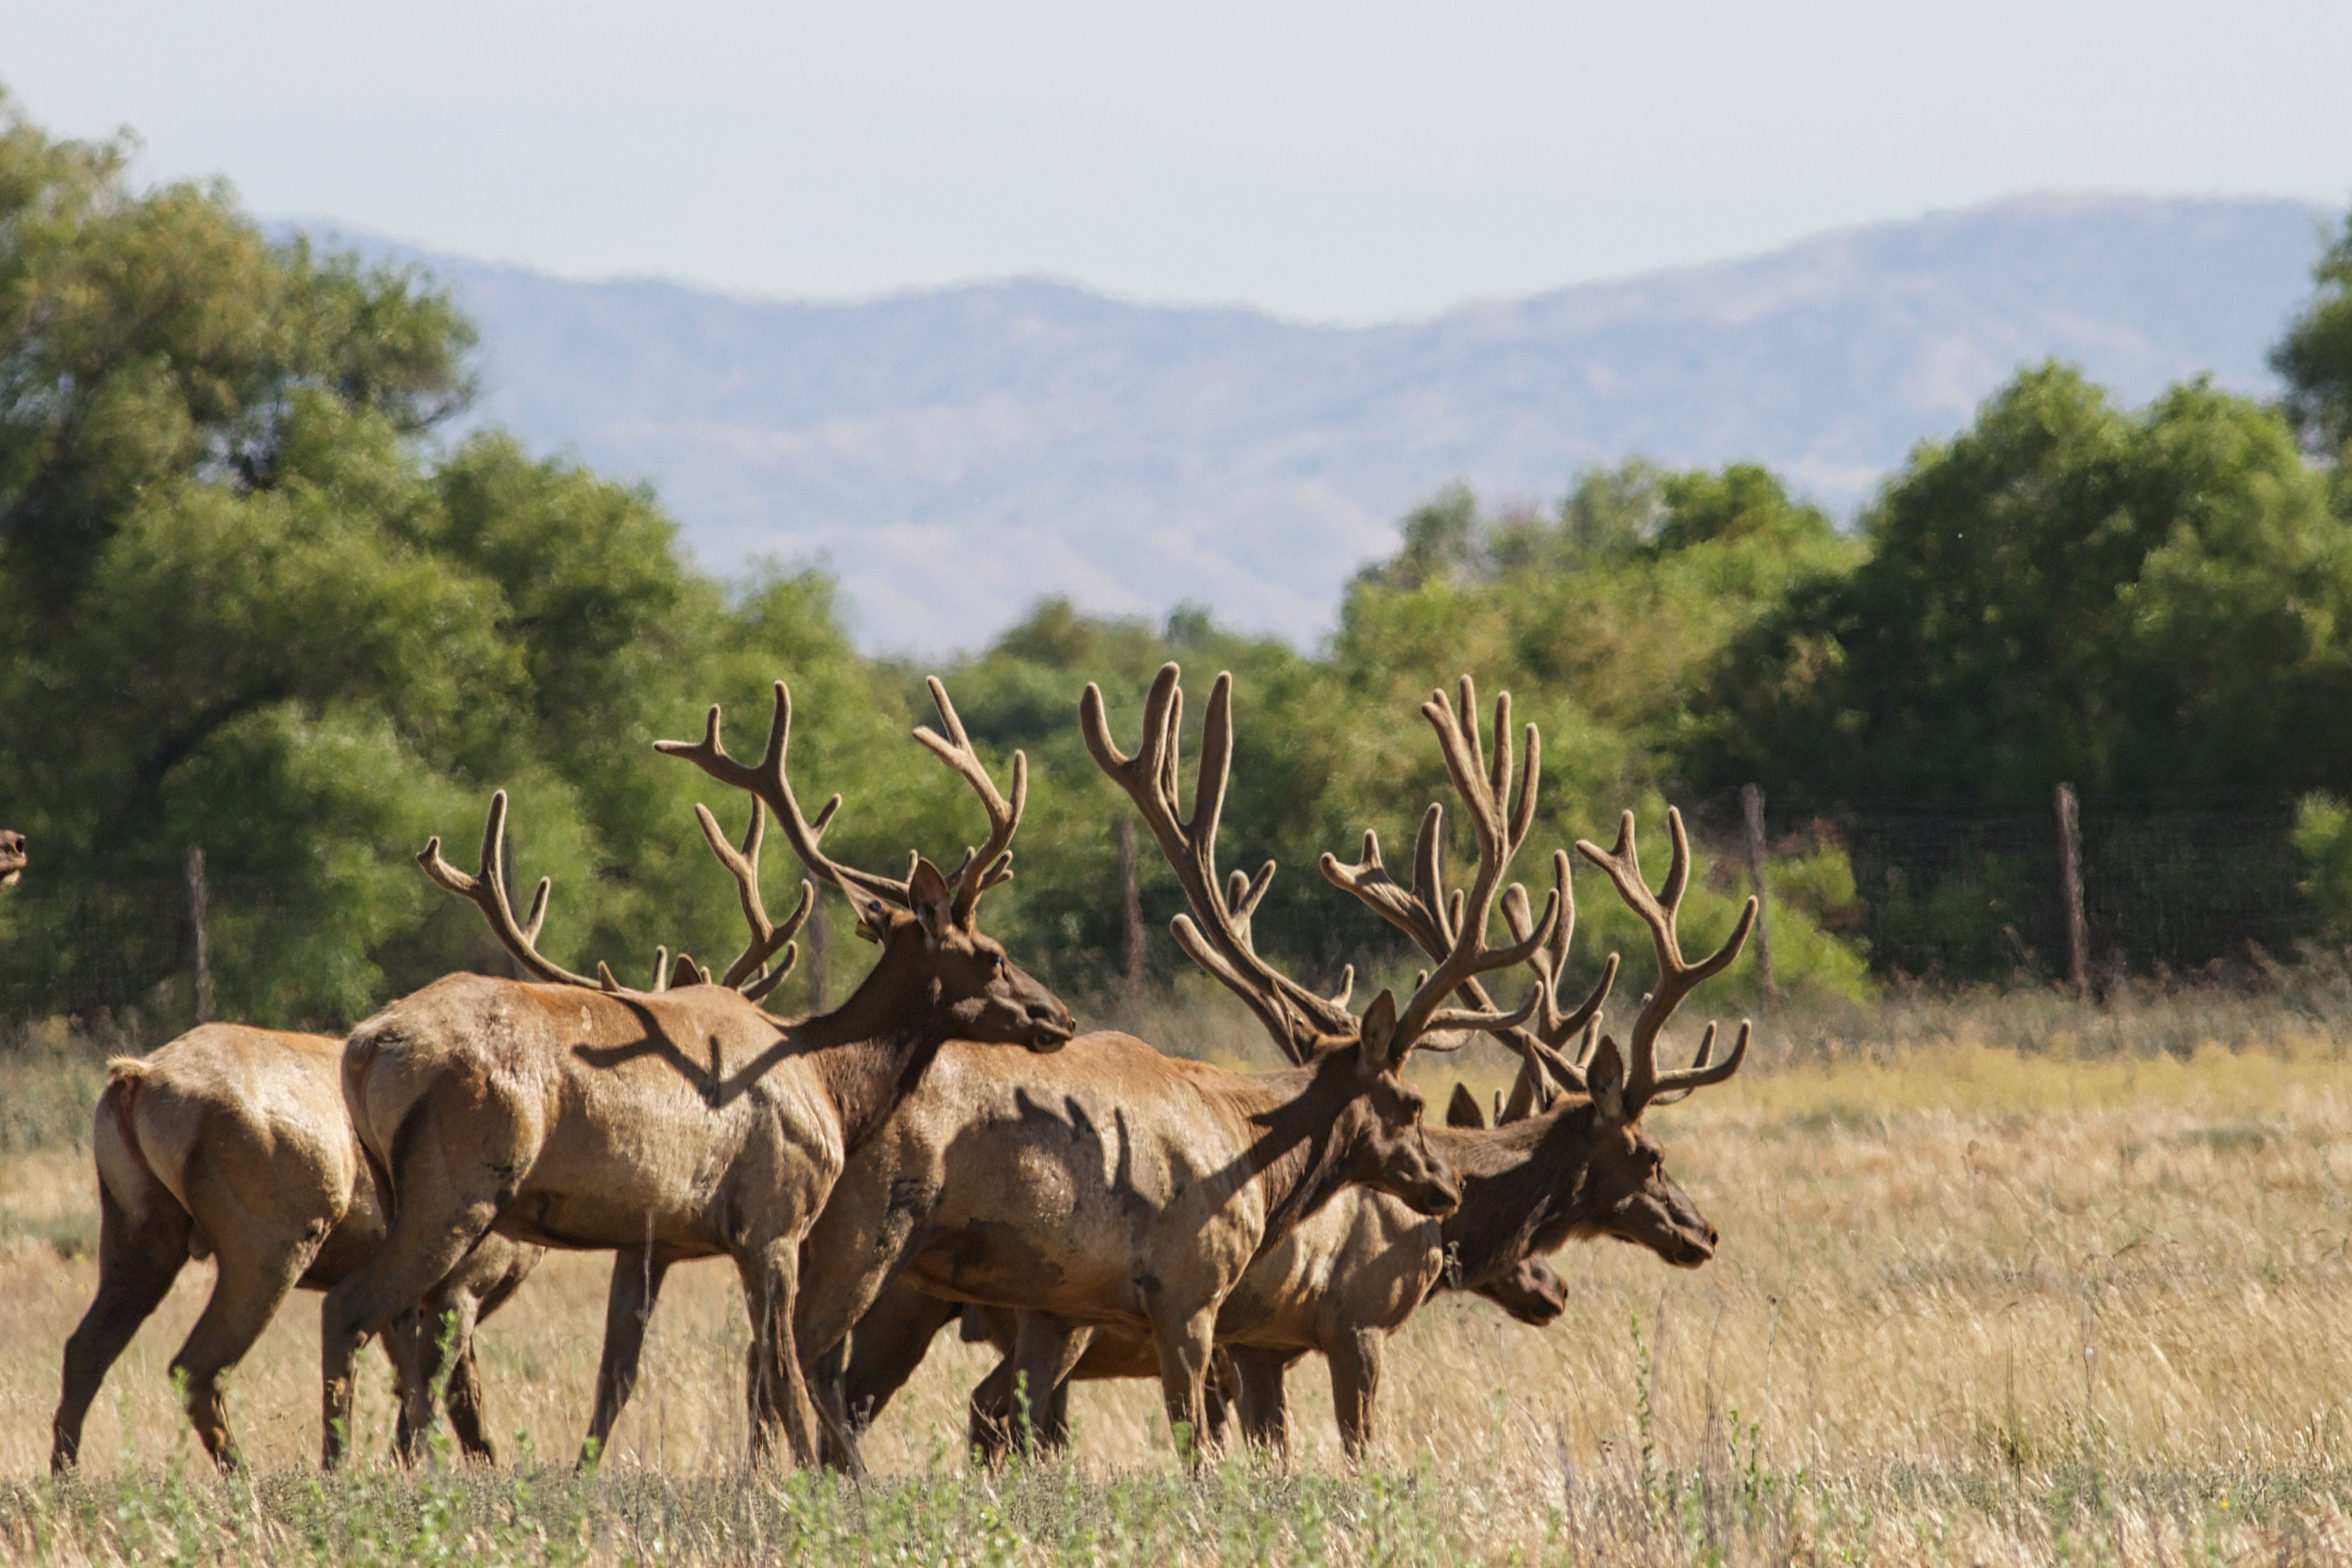 Half a dozen large brown male elk with their antlers covered in velvet standing side by side in a grassland